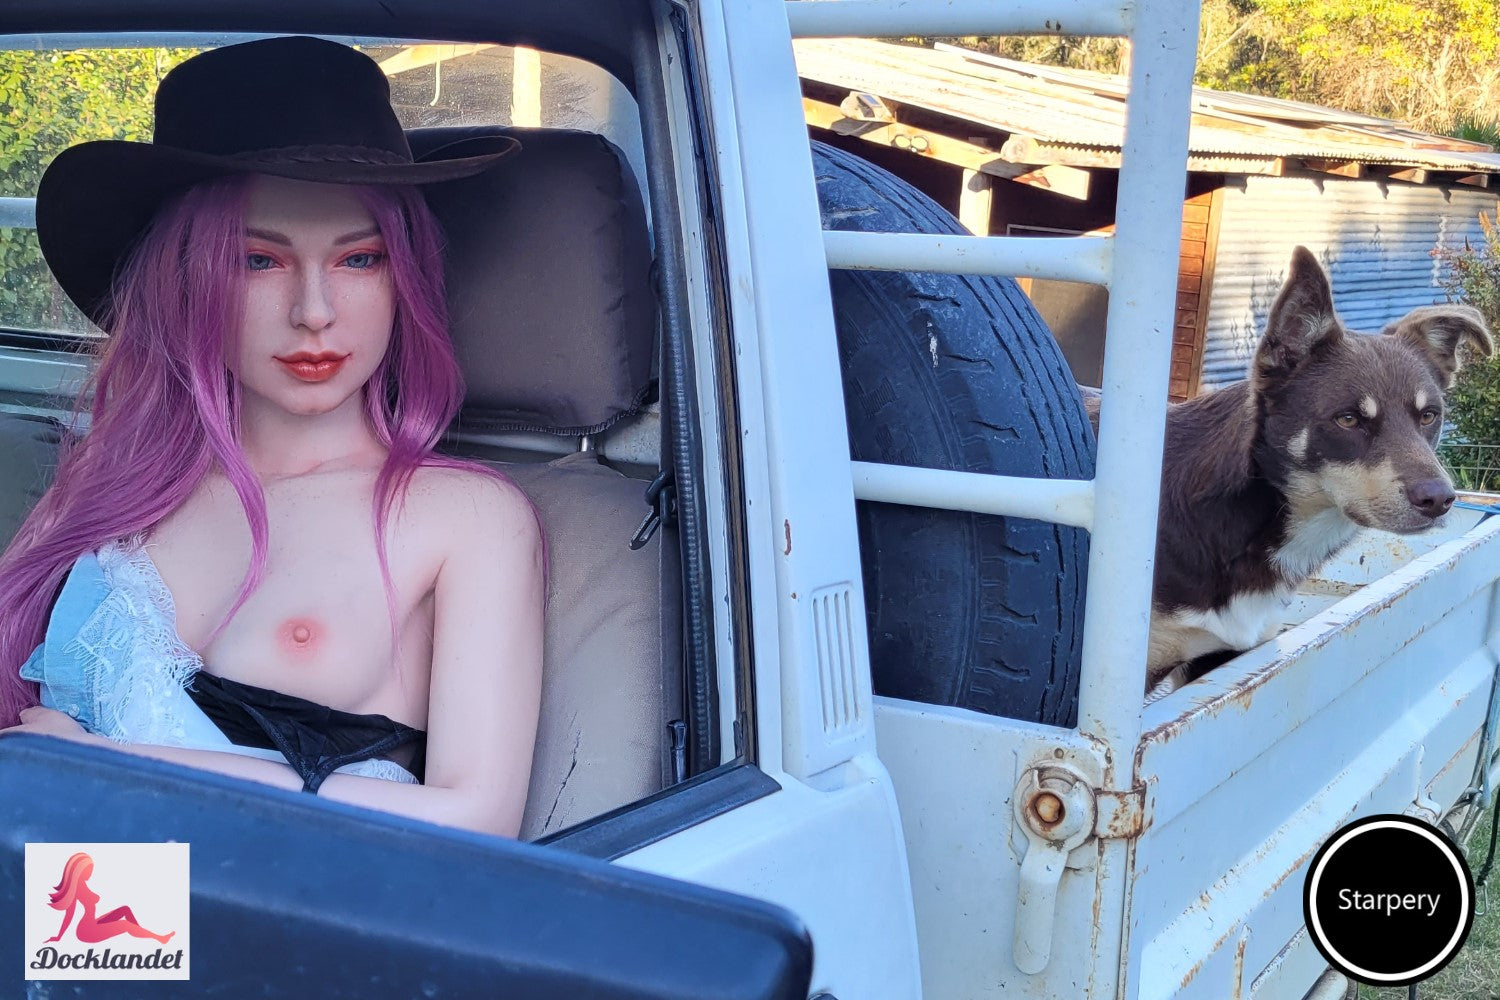 Starpery Queen 171cm A-Cup sex doll. Pink Hair real doll With Small Breast and Blue Eyes. Sitting in a car with a cowboy hat and a died. Docklandet Store in Sweden. Free Delivery to Whole EU.